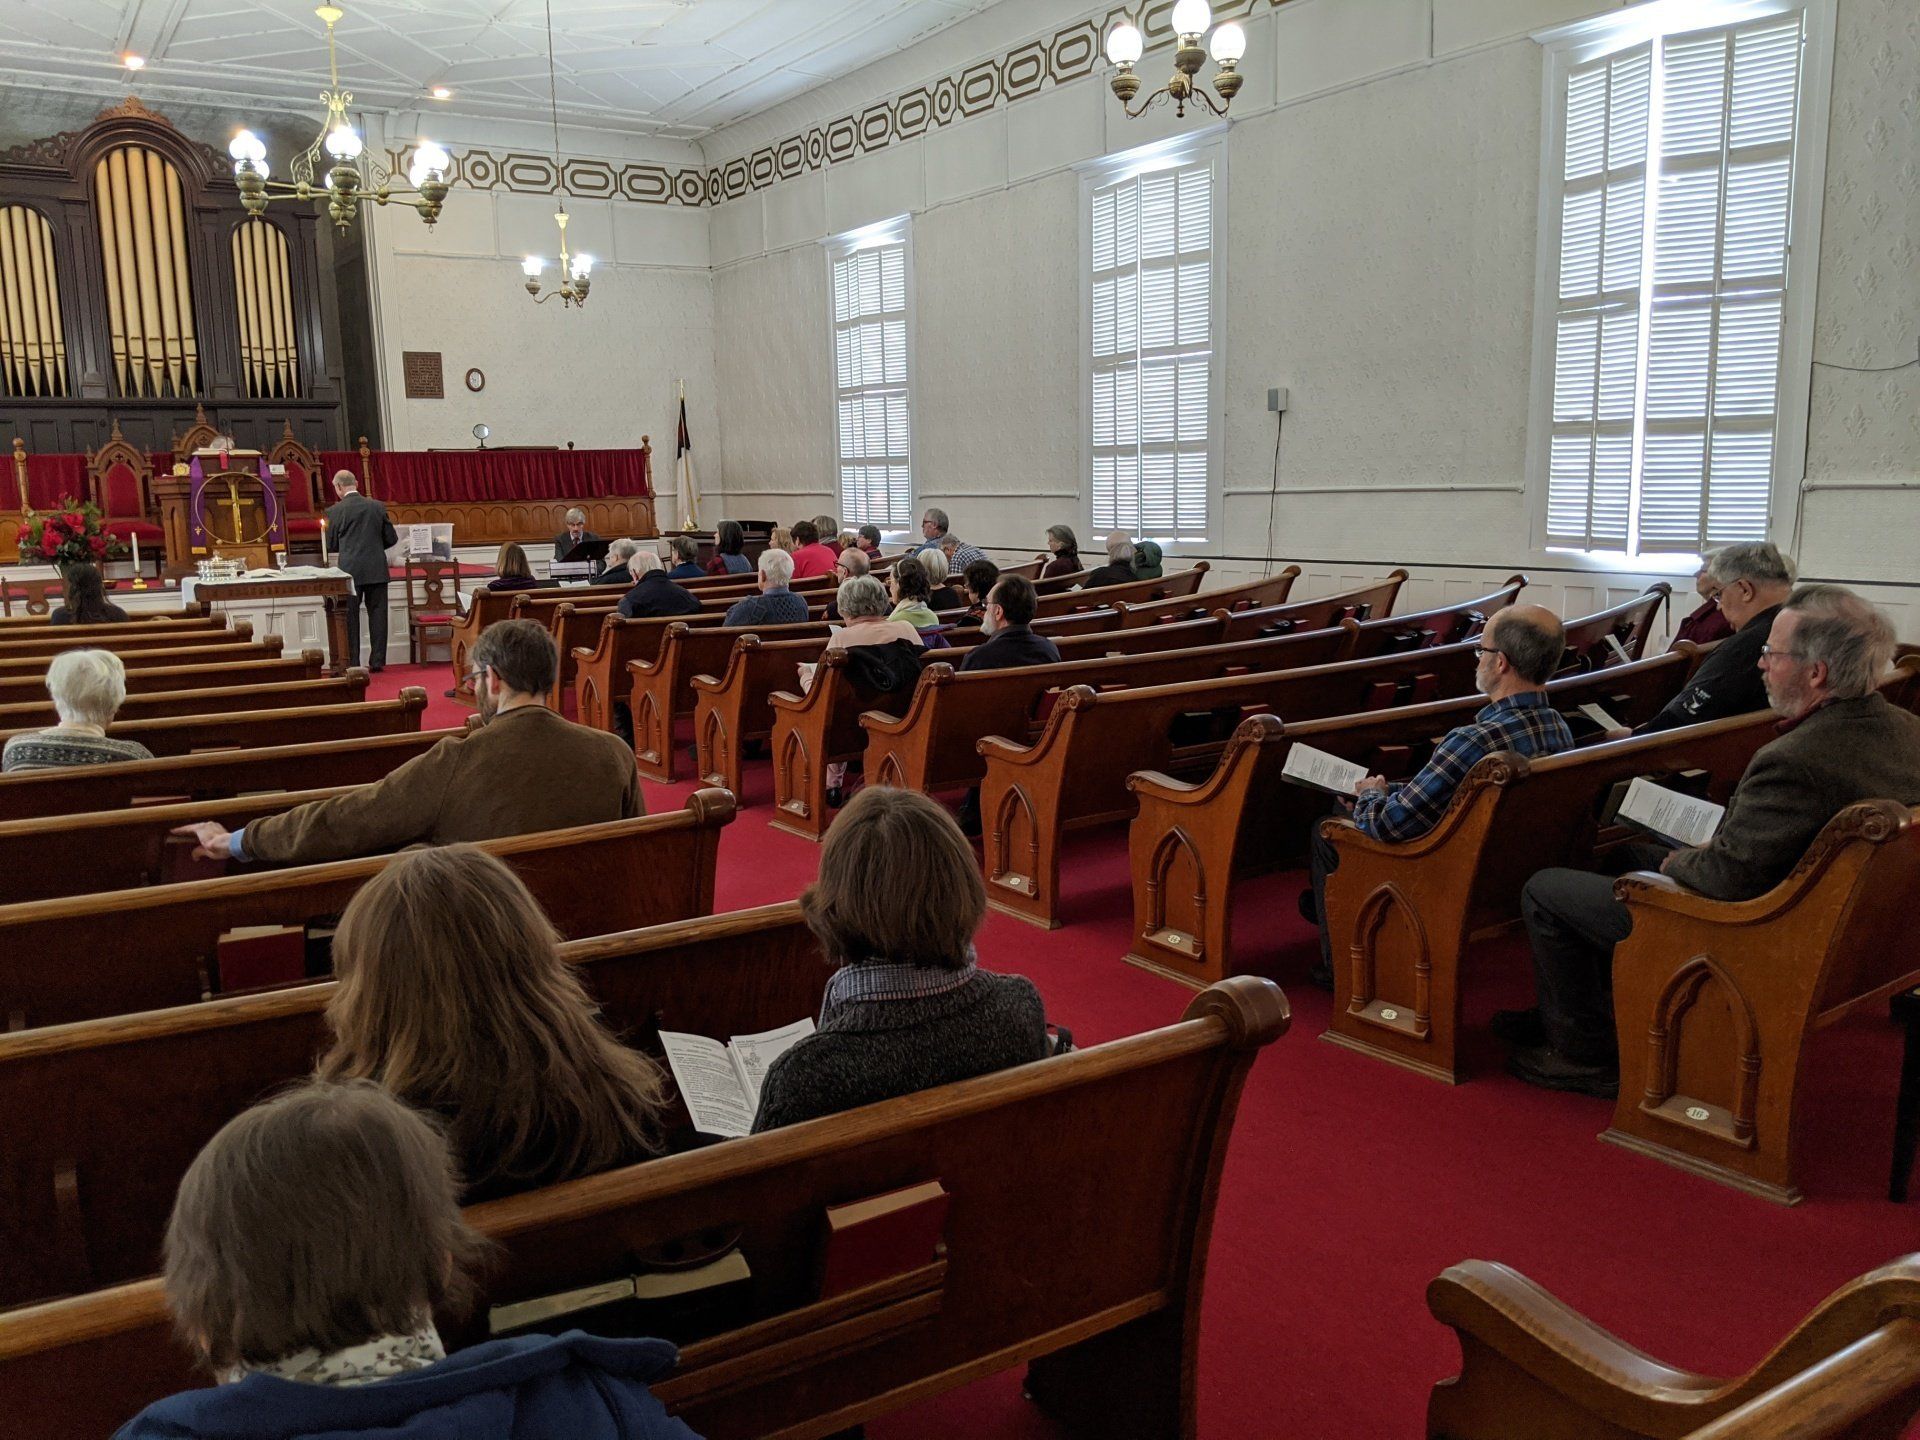 Photo of people in the Pews during a service